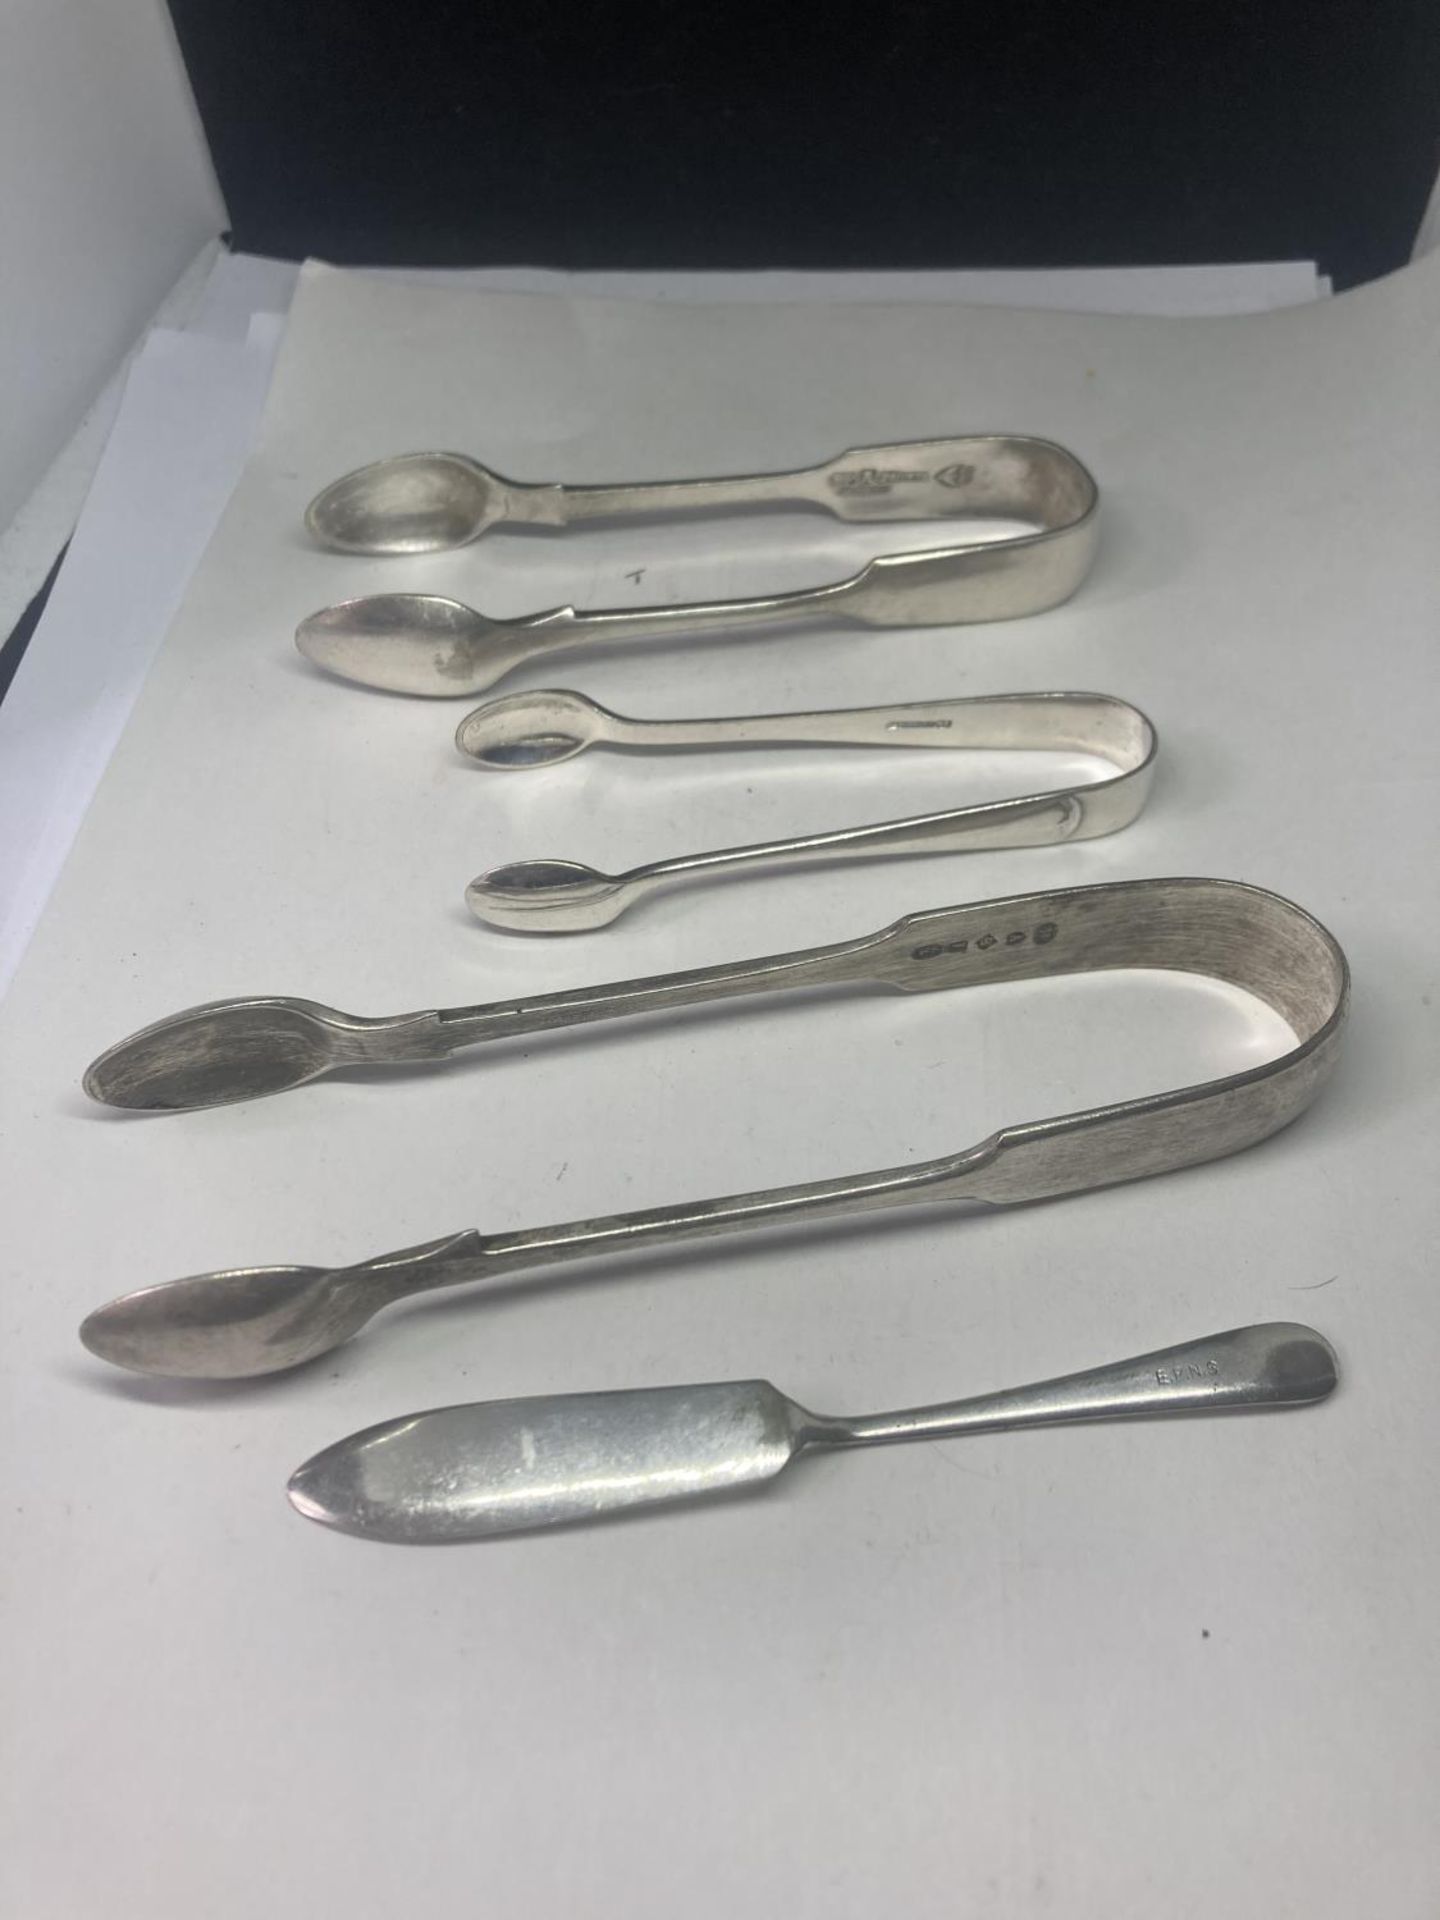 FOUE SILVER PLATED ITEMS TO INCLUDE THREE SETS OF NIPS AND A BUTTER KNIFE - Image 3 of 4